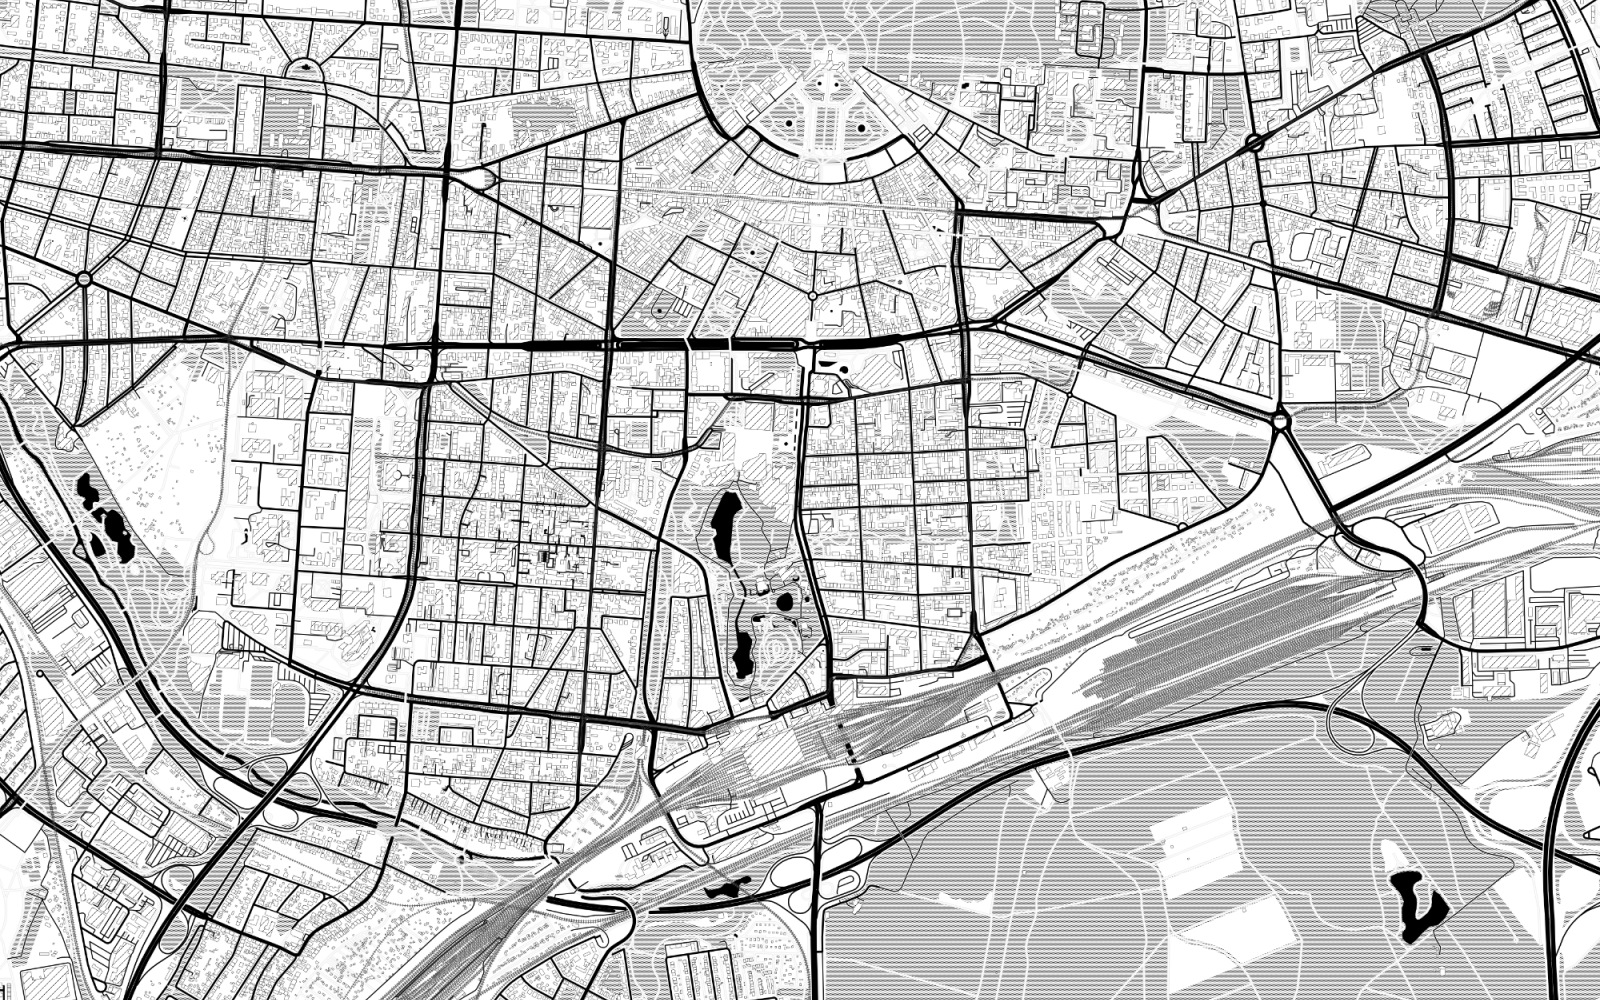 The picture shows a black and white map of Karlsruhe